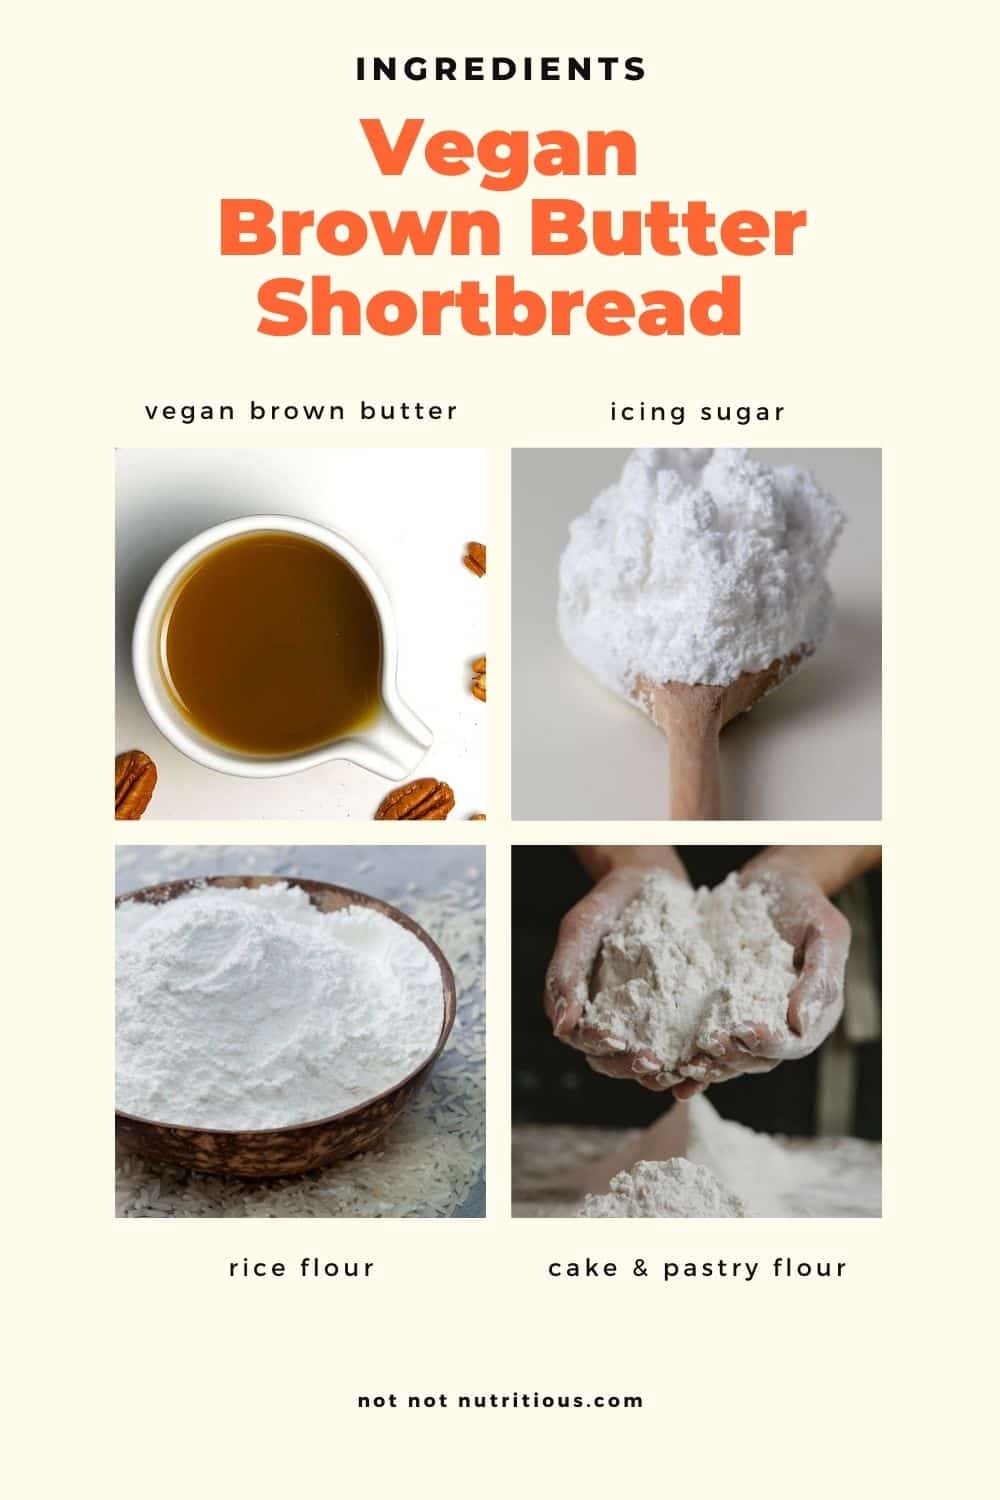 Ingredients for Vegan Brown Butter Shortbread: vegan brown butter, icing sugar, rice flour, cake and pastry flour